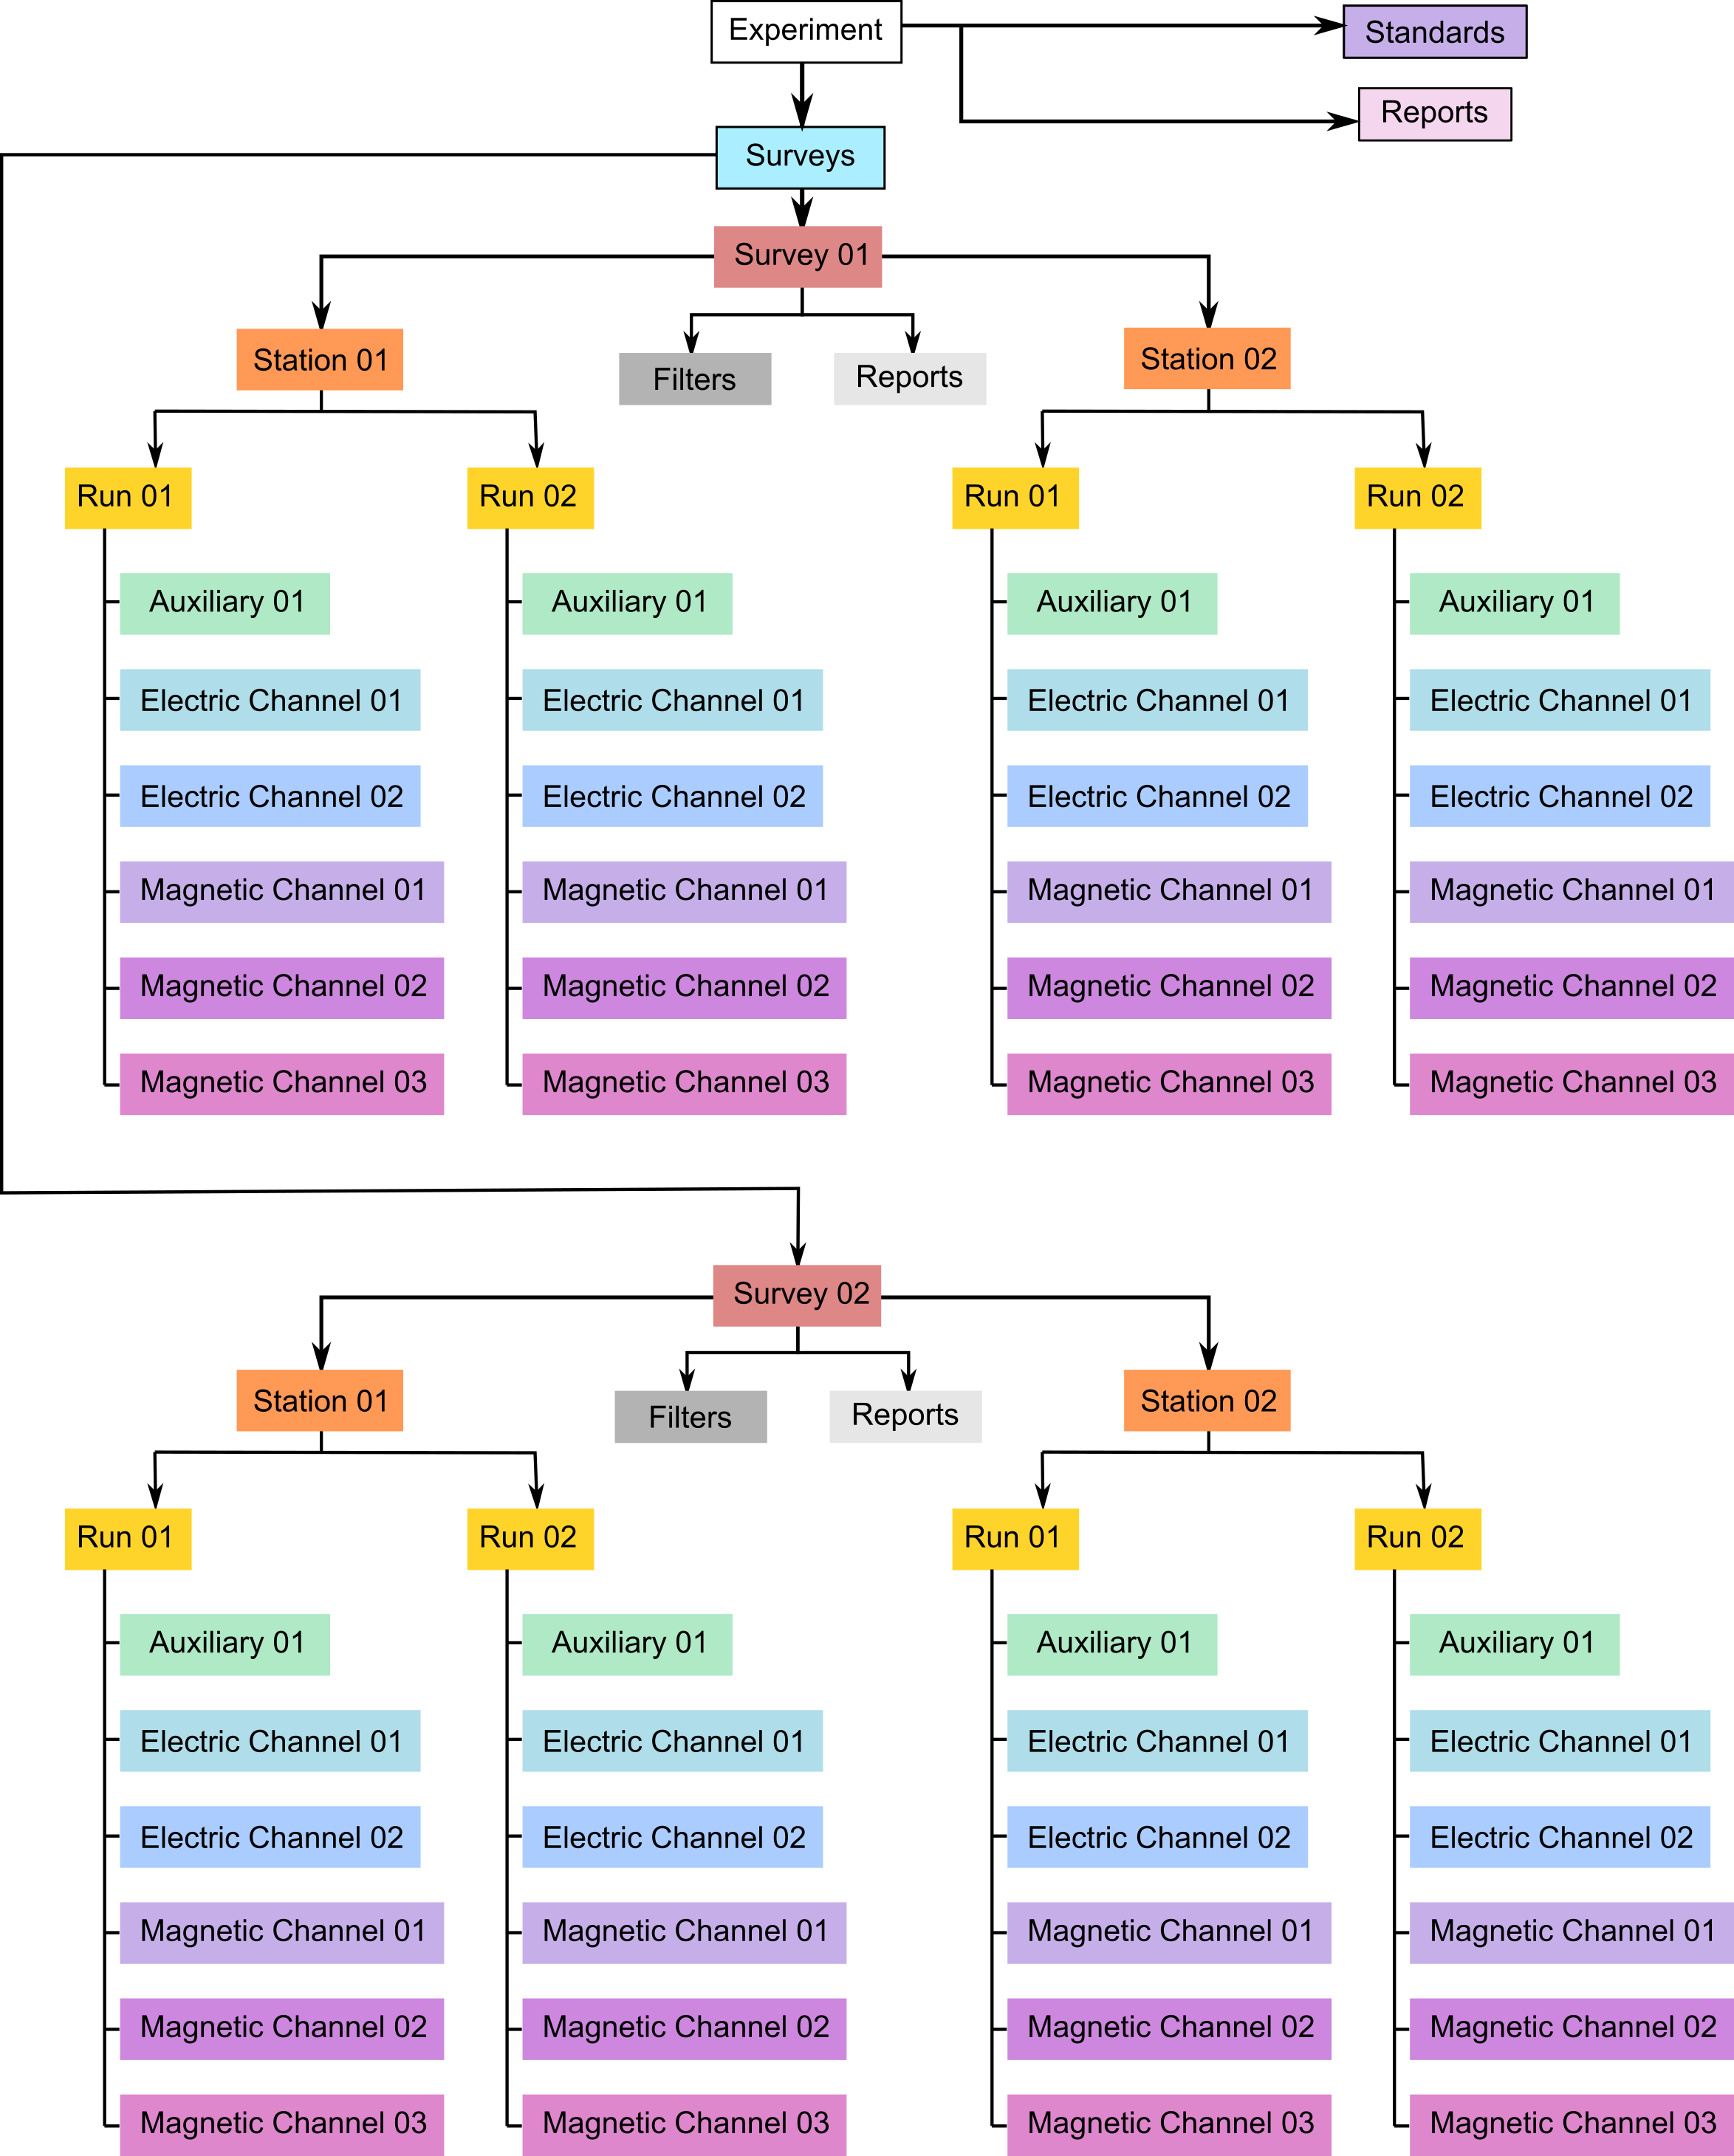 ../_images/example_mt_file_structure.png